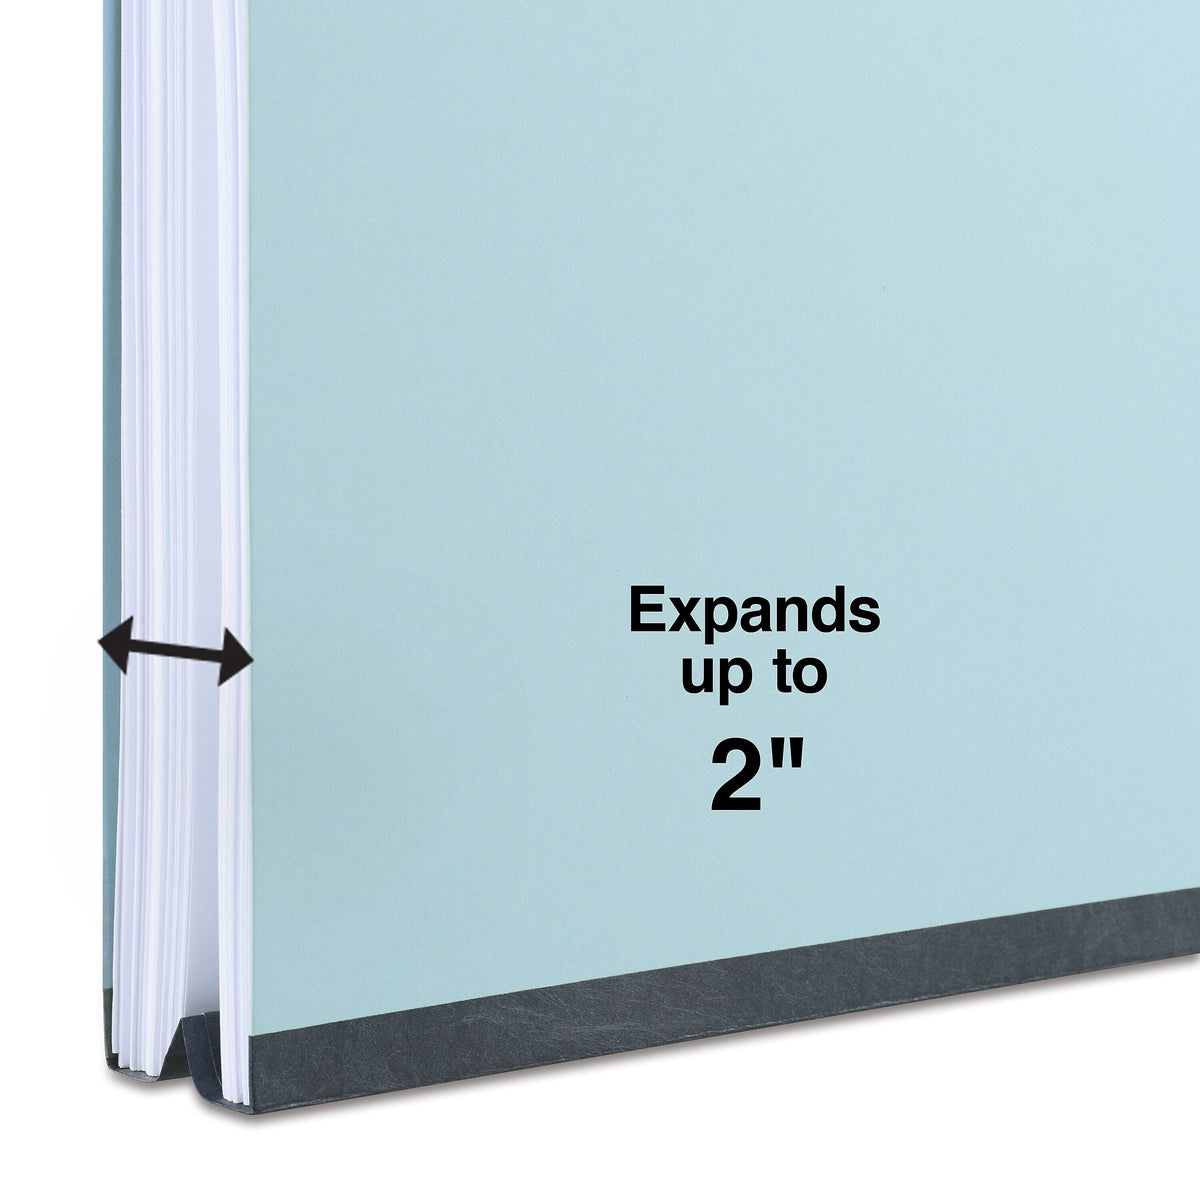 Staples® 60% Recycled Pressboard Classification Folder, 2" Expansion, Letter Size, Blue, 25/Box